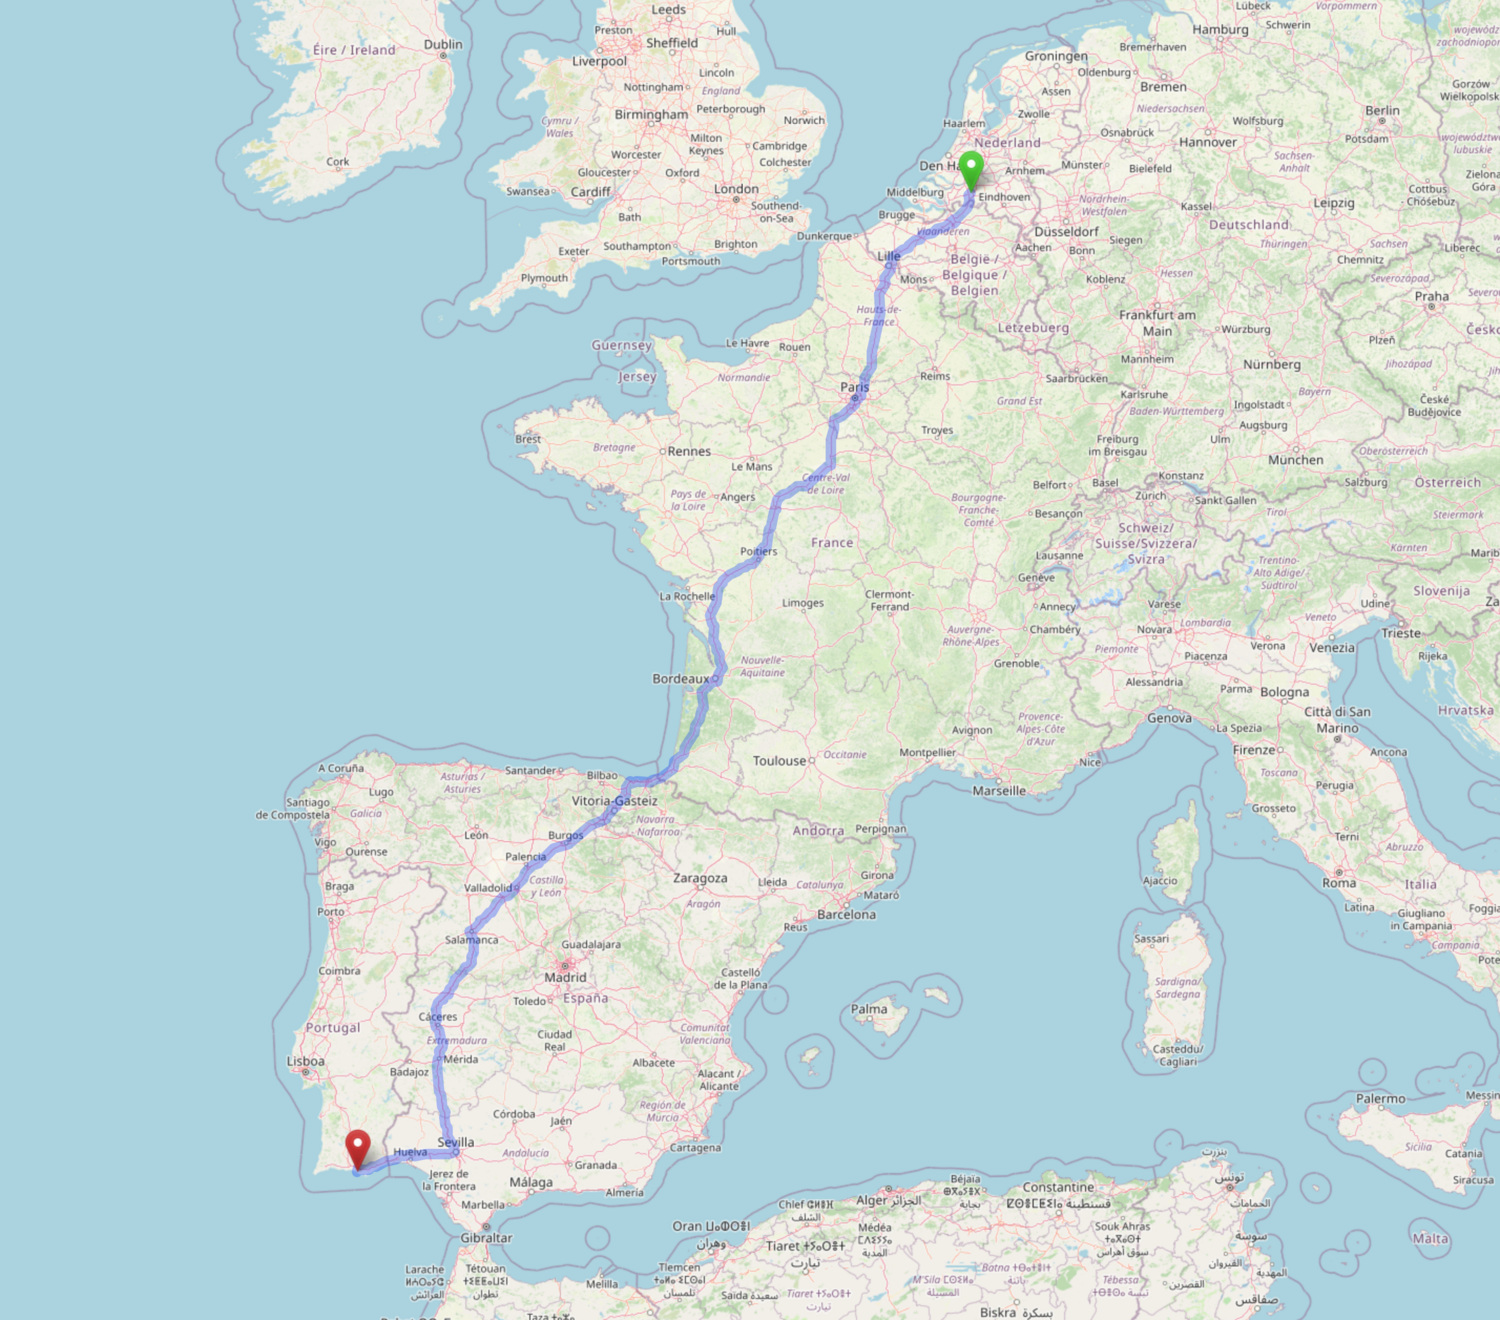 From our home near *Breda, Netherlands* to *Vale de Lobo (Almancil), Portugal* is about 2350km or 24hrs of driving time 😅  We drove this in 3 days (outbound) and 2 days (return trip). Map source: [openstreetmap.org](https://www.openstreetmap.org)